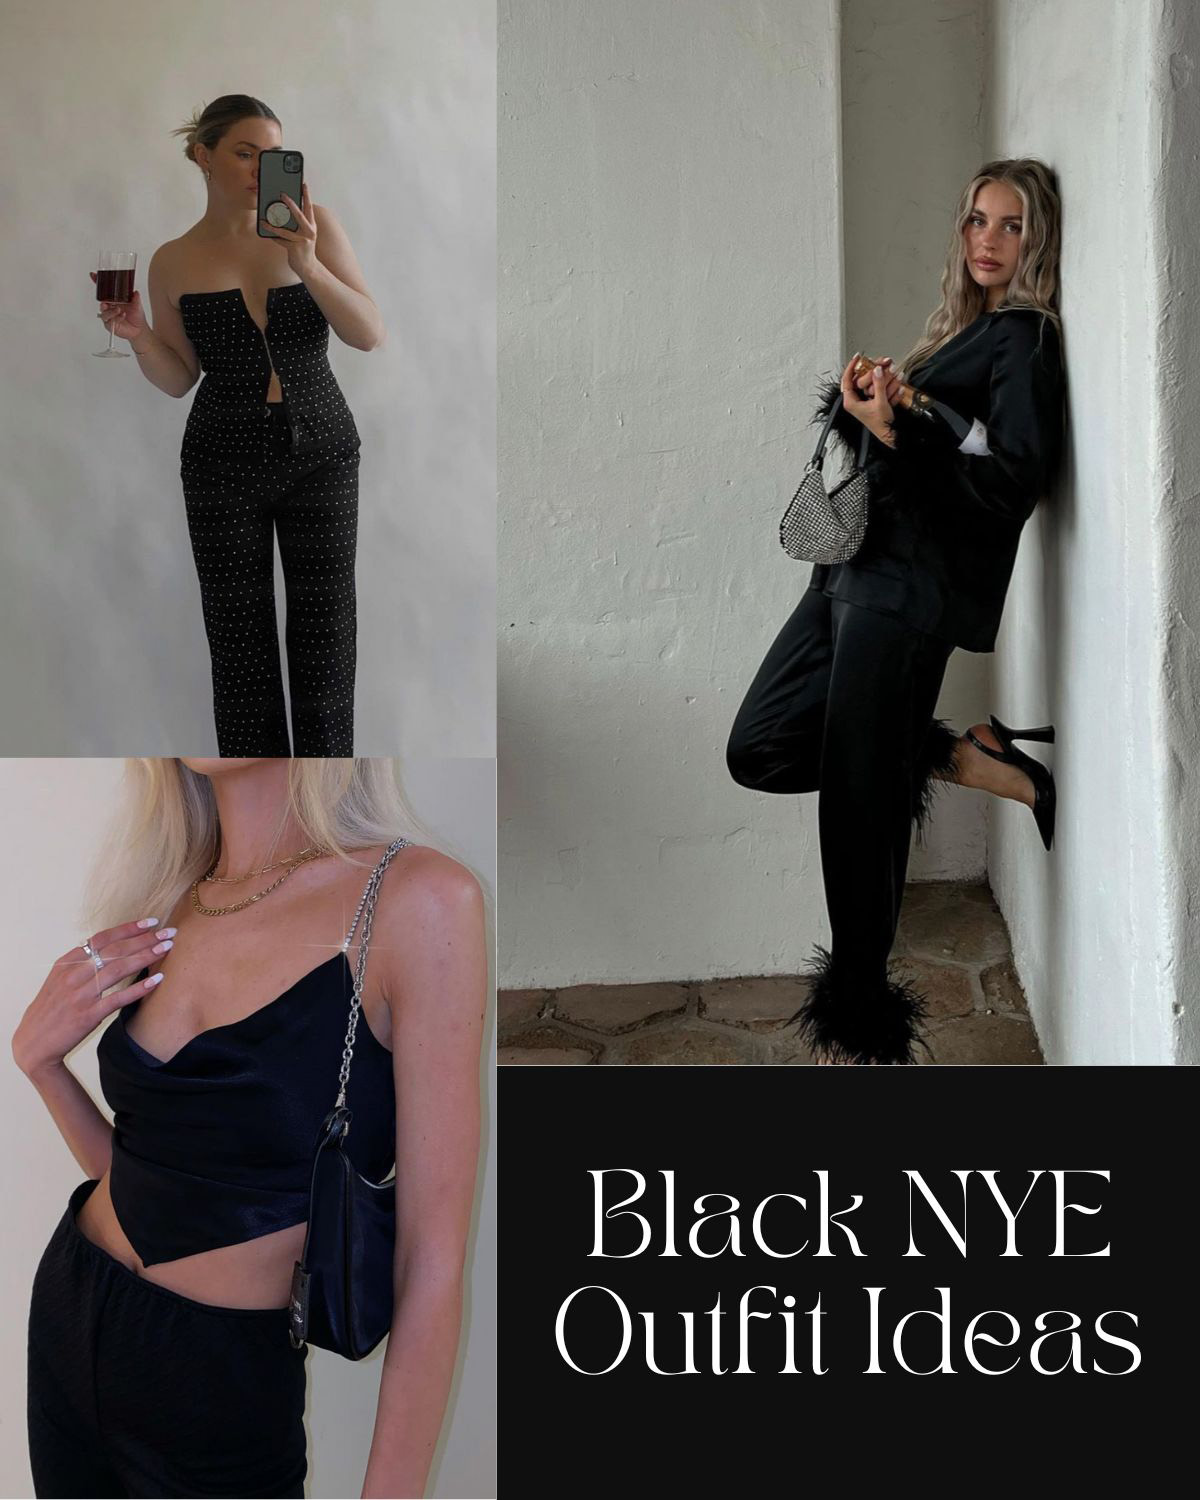 Three black outfits for a casual New Year's Eve